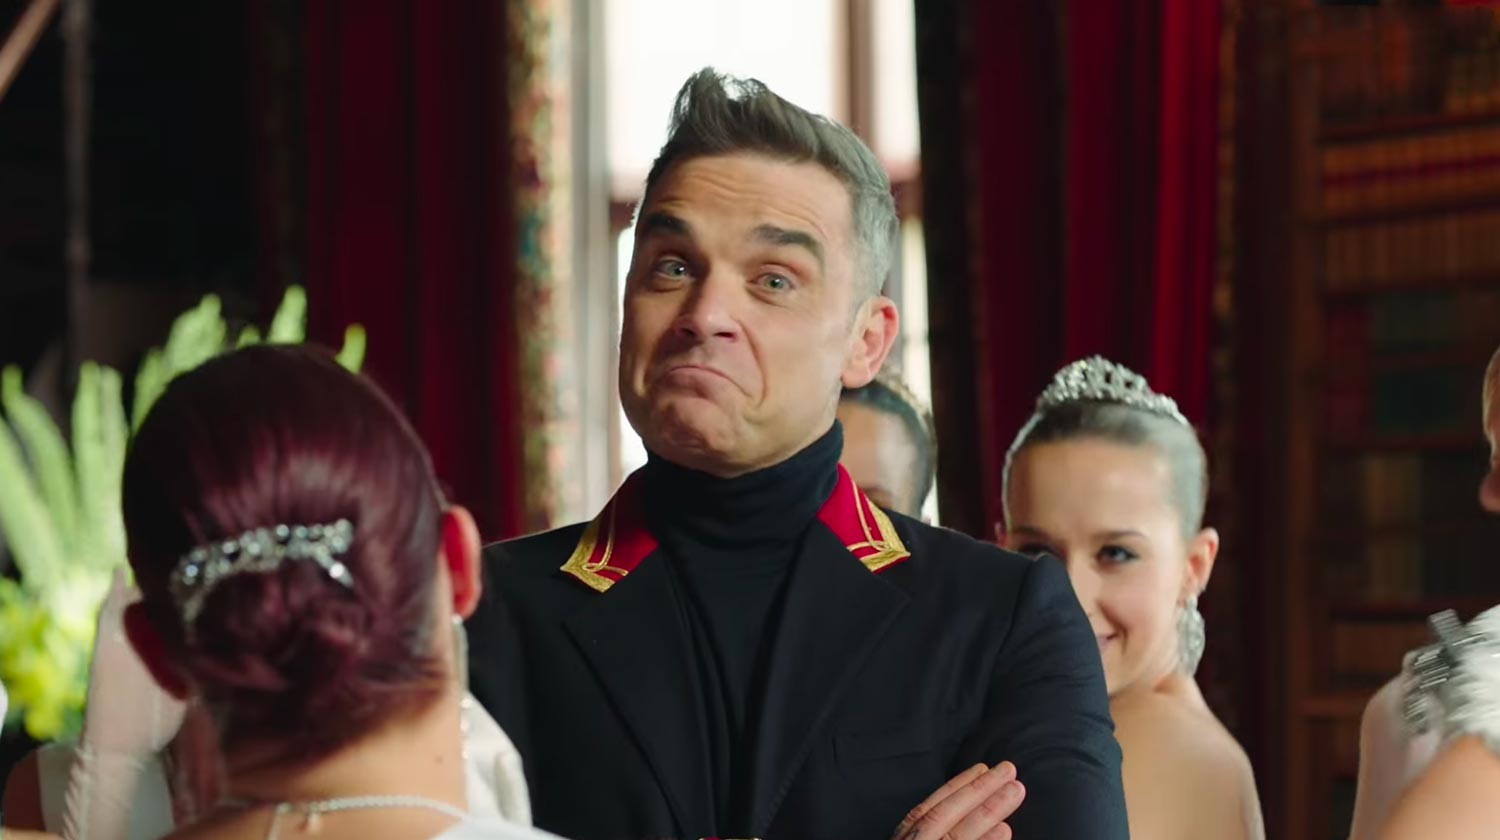 <p>Кадр видео &ldquo;<a href="https://www.youtube.com/watch?v=CN0w-jNKyUg" target="_blank">Robbie Williams | Party Like A Russian - Official Video Teaser</a>&rdquo;. Скриншот &copy; L!FE</p>